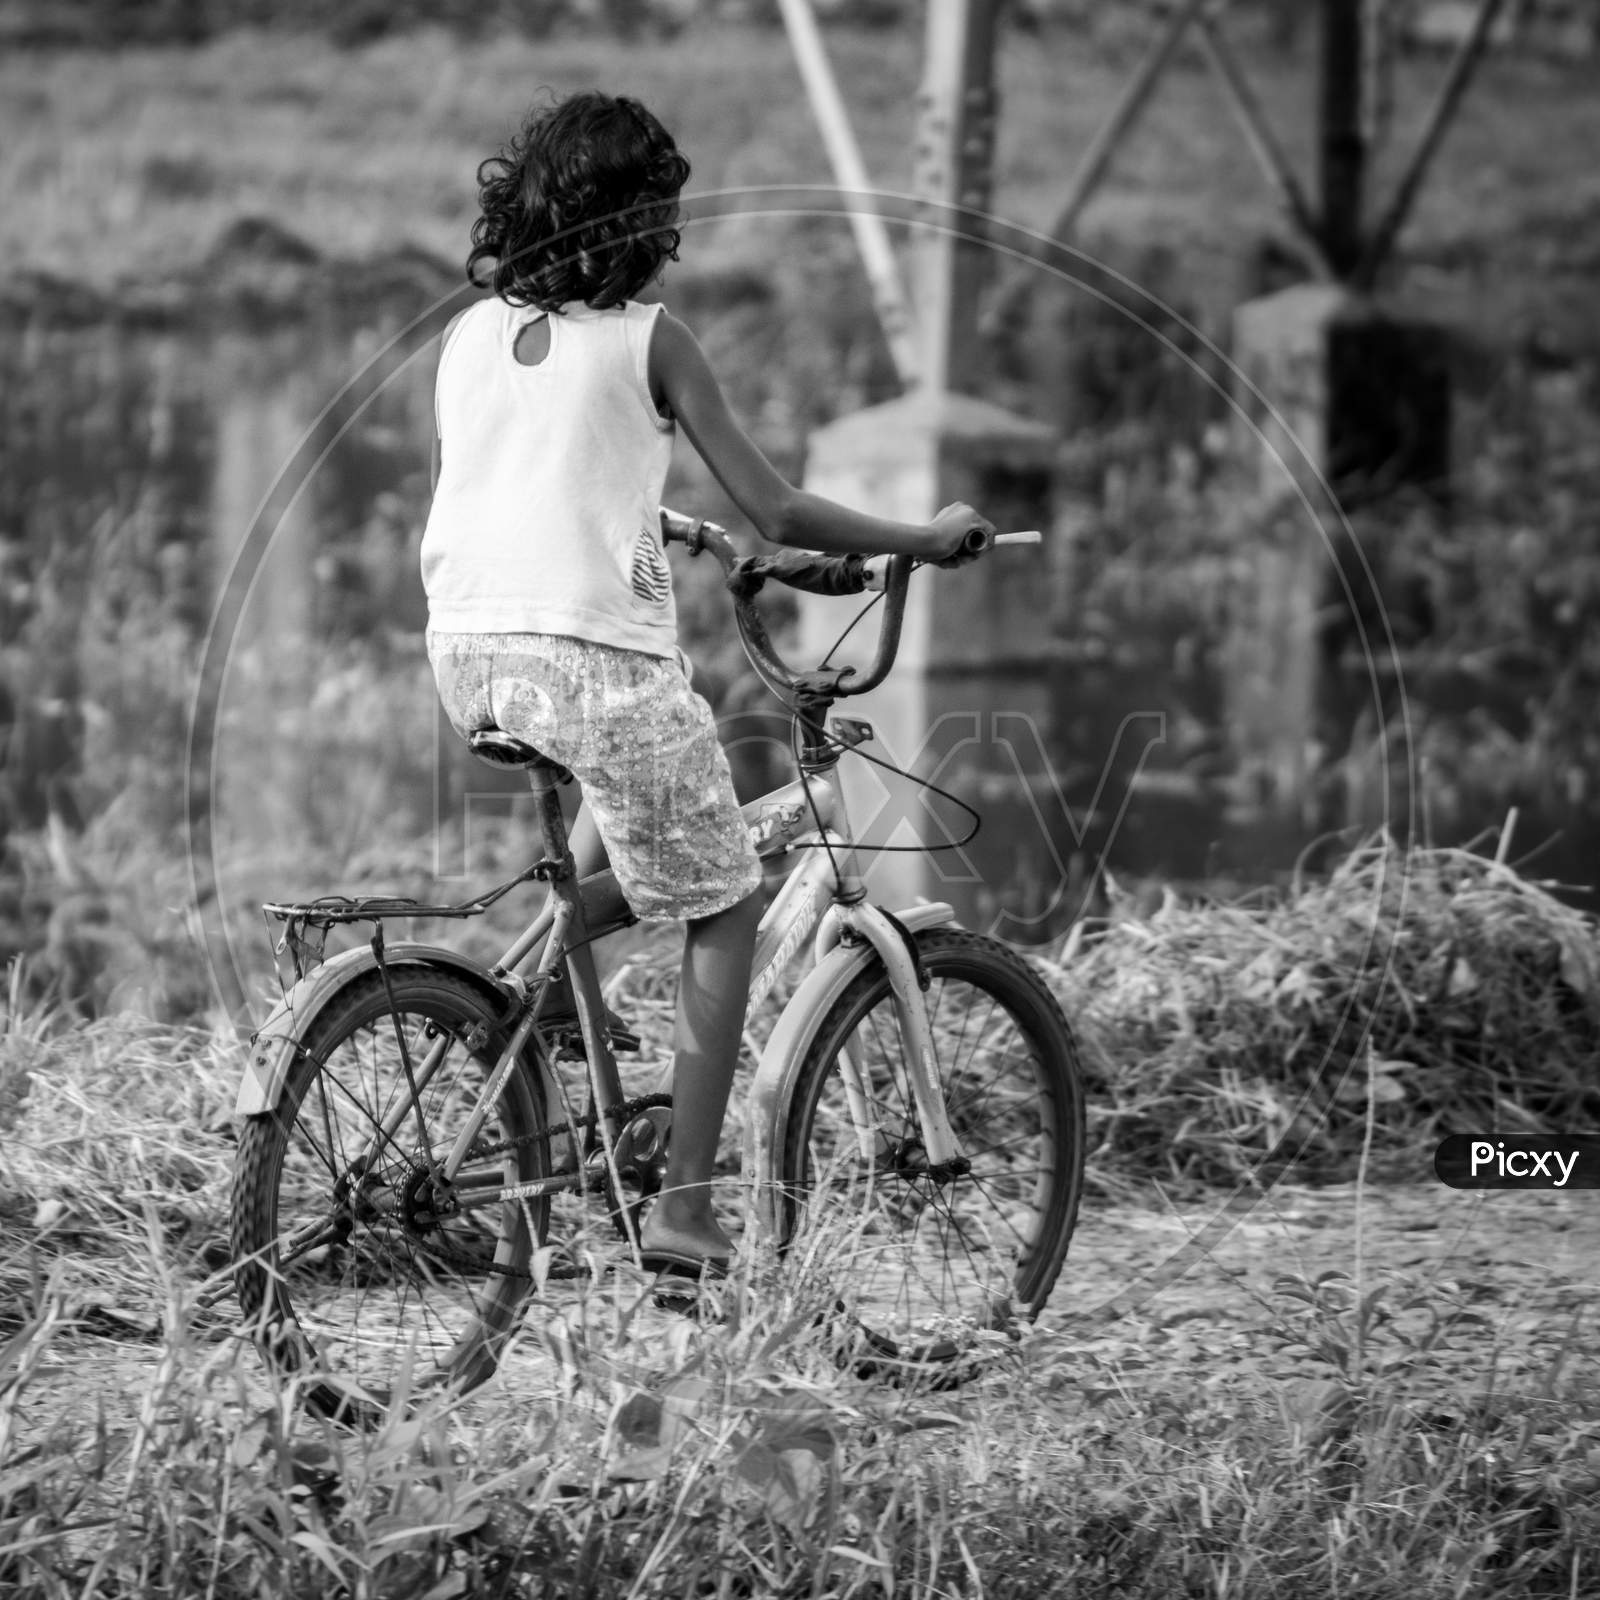 Small Girl Riding A Bicycle In A Rural Village Road, Beautiful Memories Of Childhood Concept, Black And White Photograph.